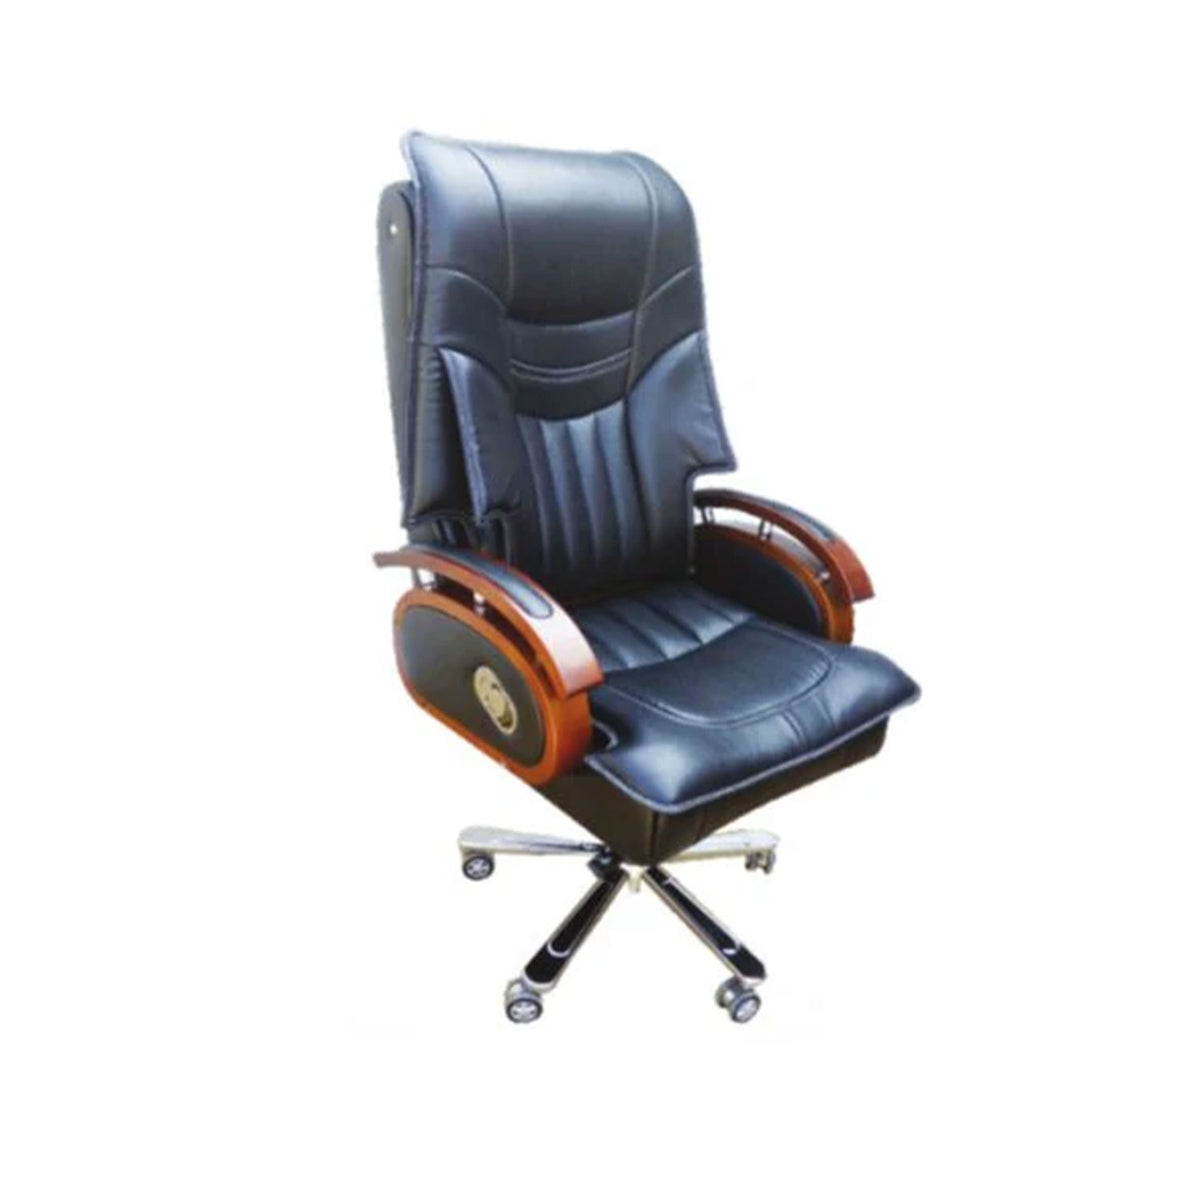 SmileSellers Leatherette Black Ayesha Steel Leather Chair, for Office